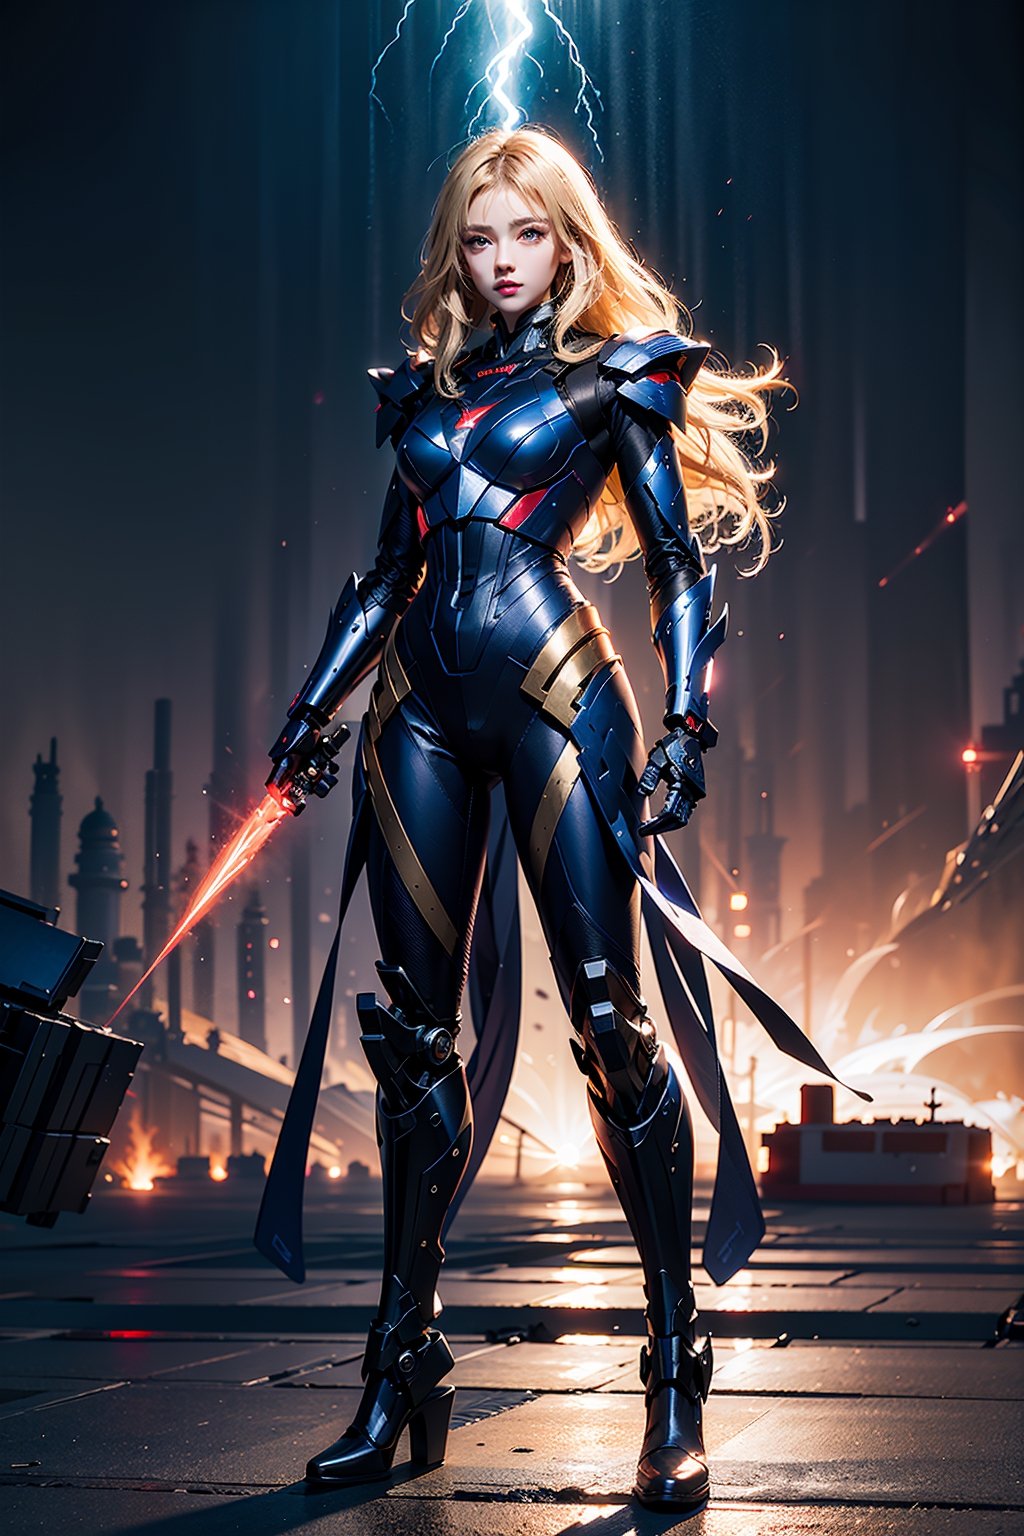 1 girl, beautiful face, wearing robotic costume, robotic body, Mecha girl, blue and red costume colour, 24K, hyper quality, no weapon, good pose, realistic shadow, photogenic, dark light background , perfect scale, perfect arms and fingers, bright blonde hair, long hair, high_resolution, no NSFW, perfect lightning, blue eyelens, no weapon, no guns,dual wielding